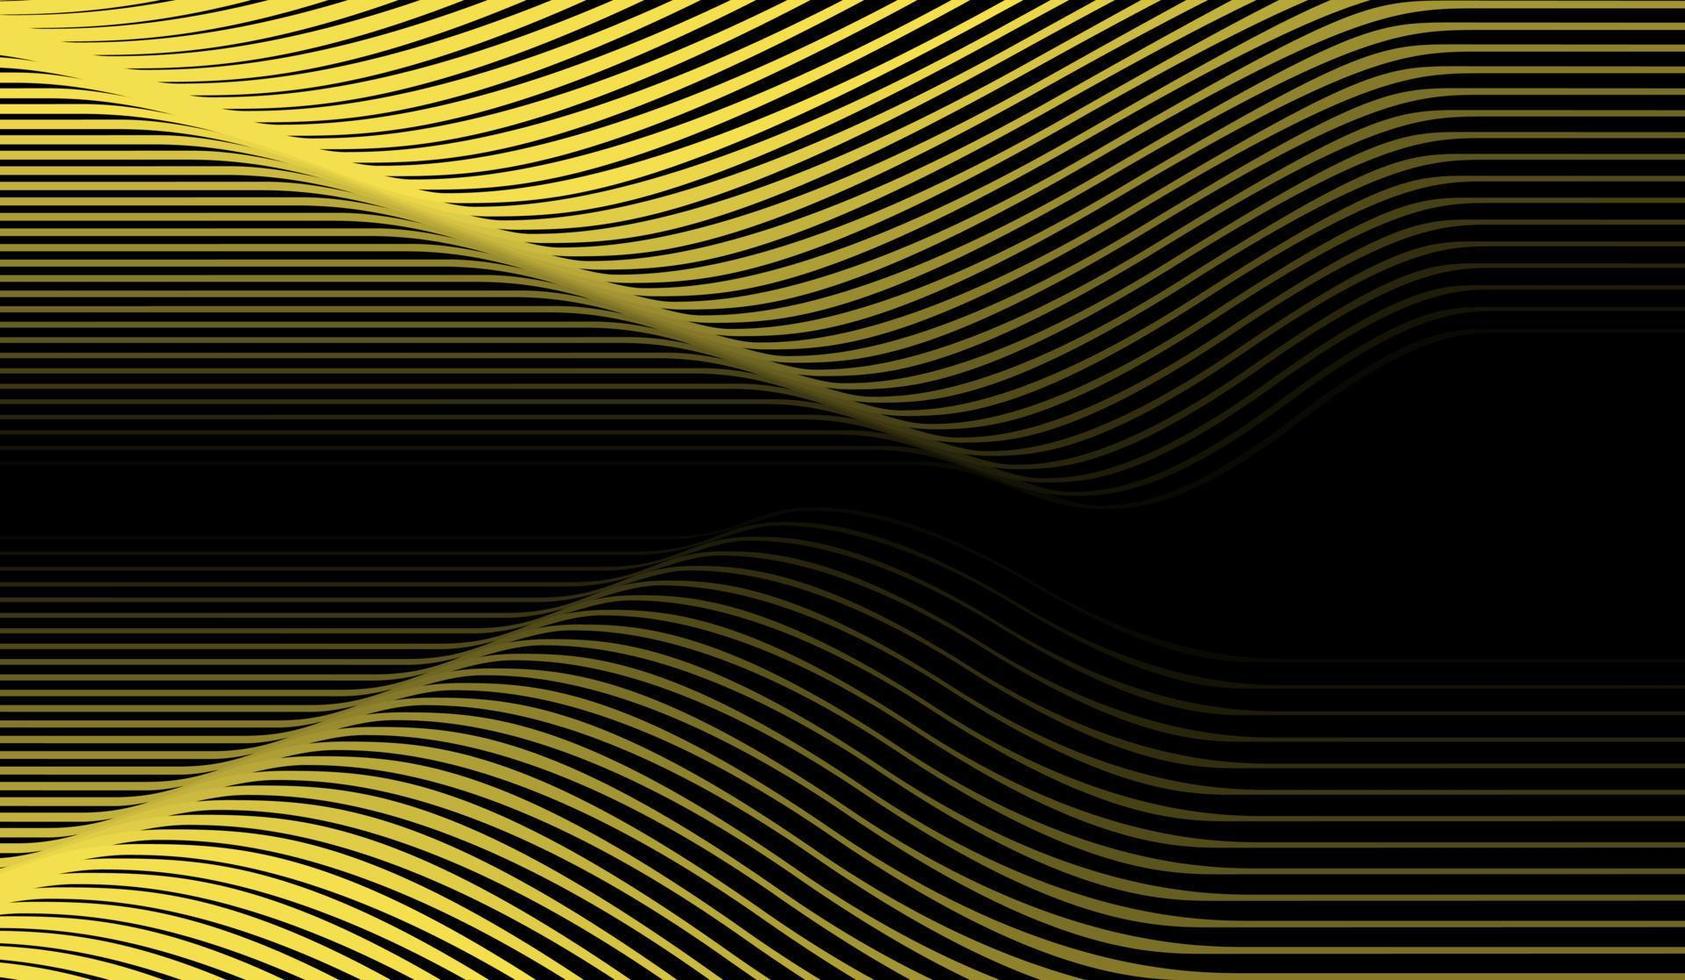 Illusion Art Patterns Yellow Curved Wave Shape vector